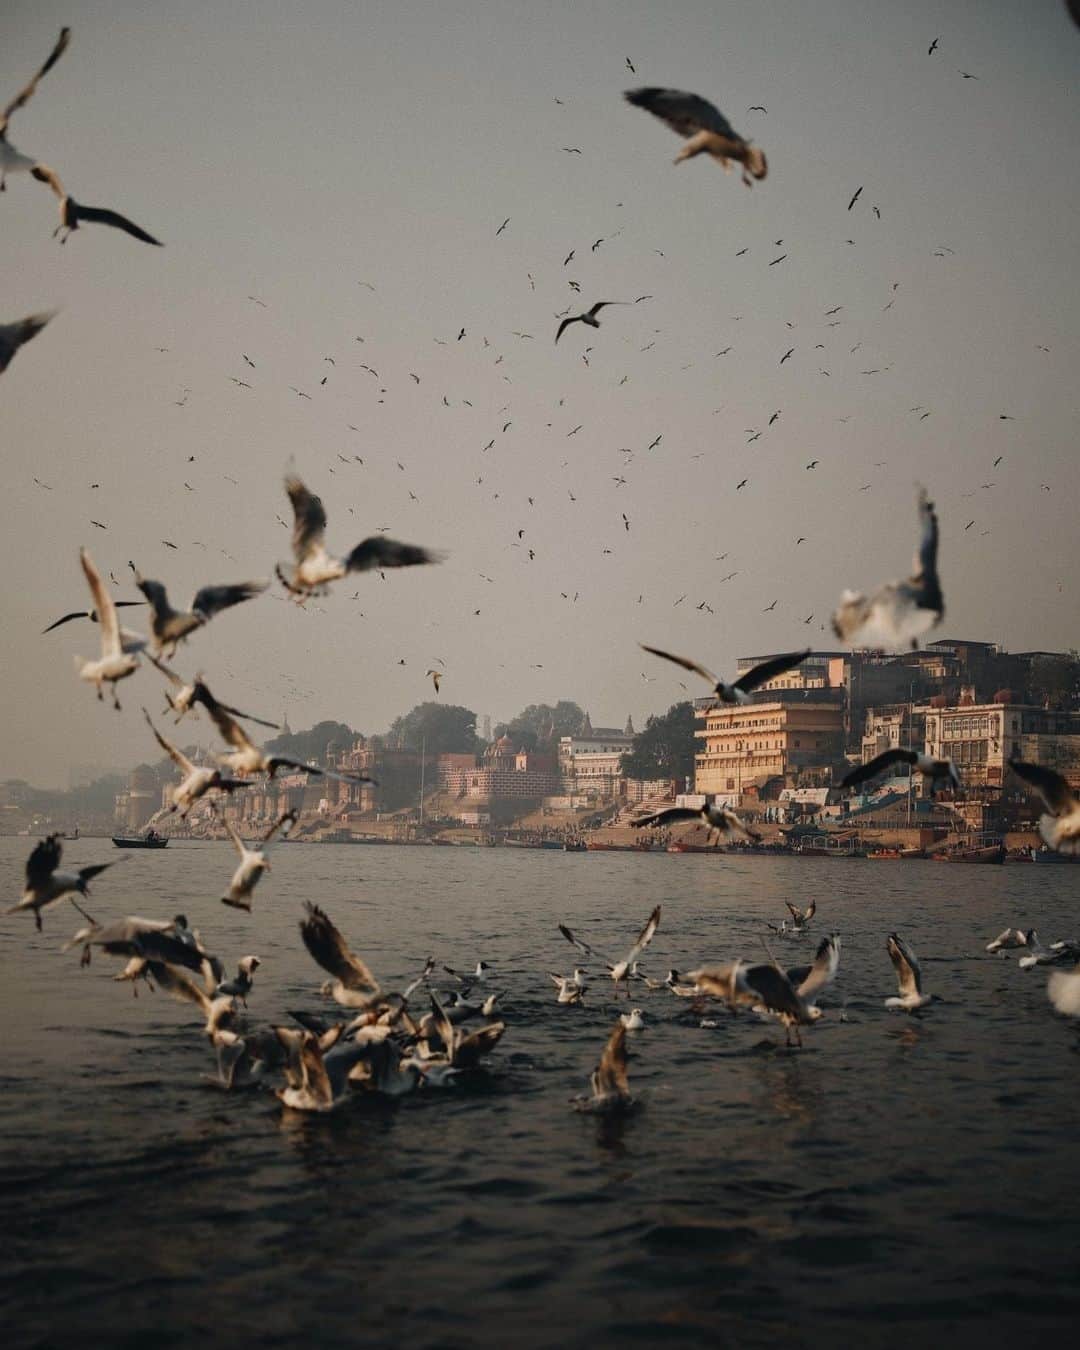 AnOther Magazineのインスタグラム：「Emerging photographers! Every week we’re spotlighting your images #AMWeeklyPhoto⁠⁠⁠ ❤️⁠ ⁠⁠⁠ This week’s submission is captured by photographer @van_sant_ in Varanasi, India 📸⁠ ⁠ ⁠ ⁠ Swipe through to find out the details for submission ➡️⁠」